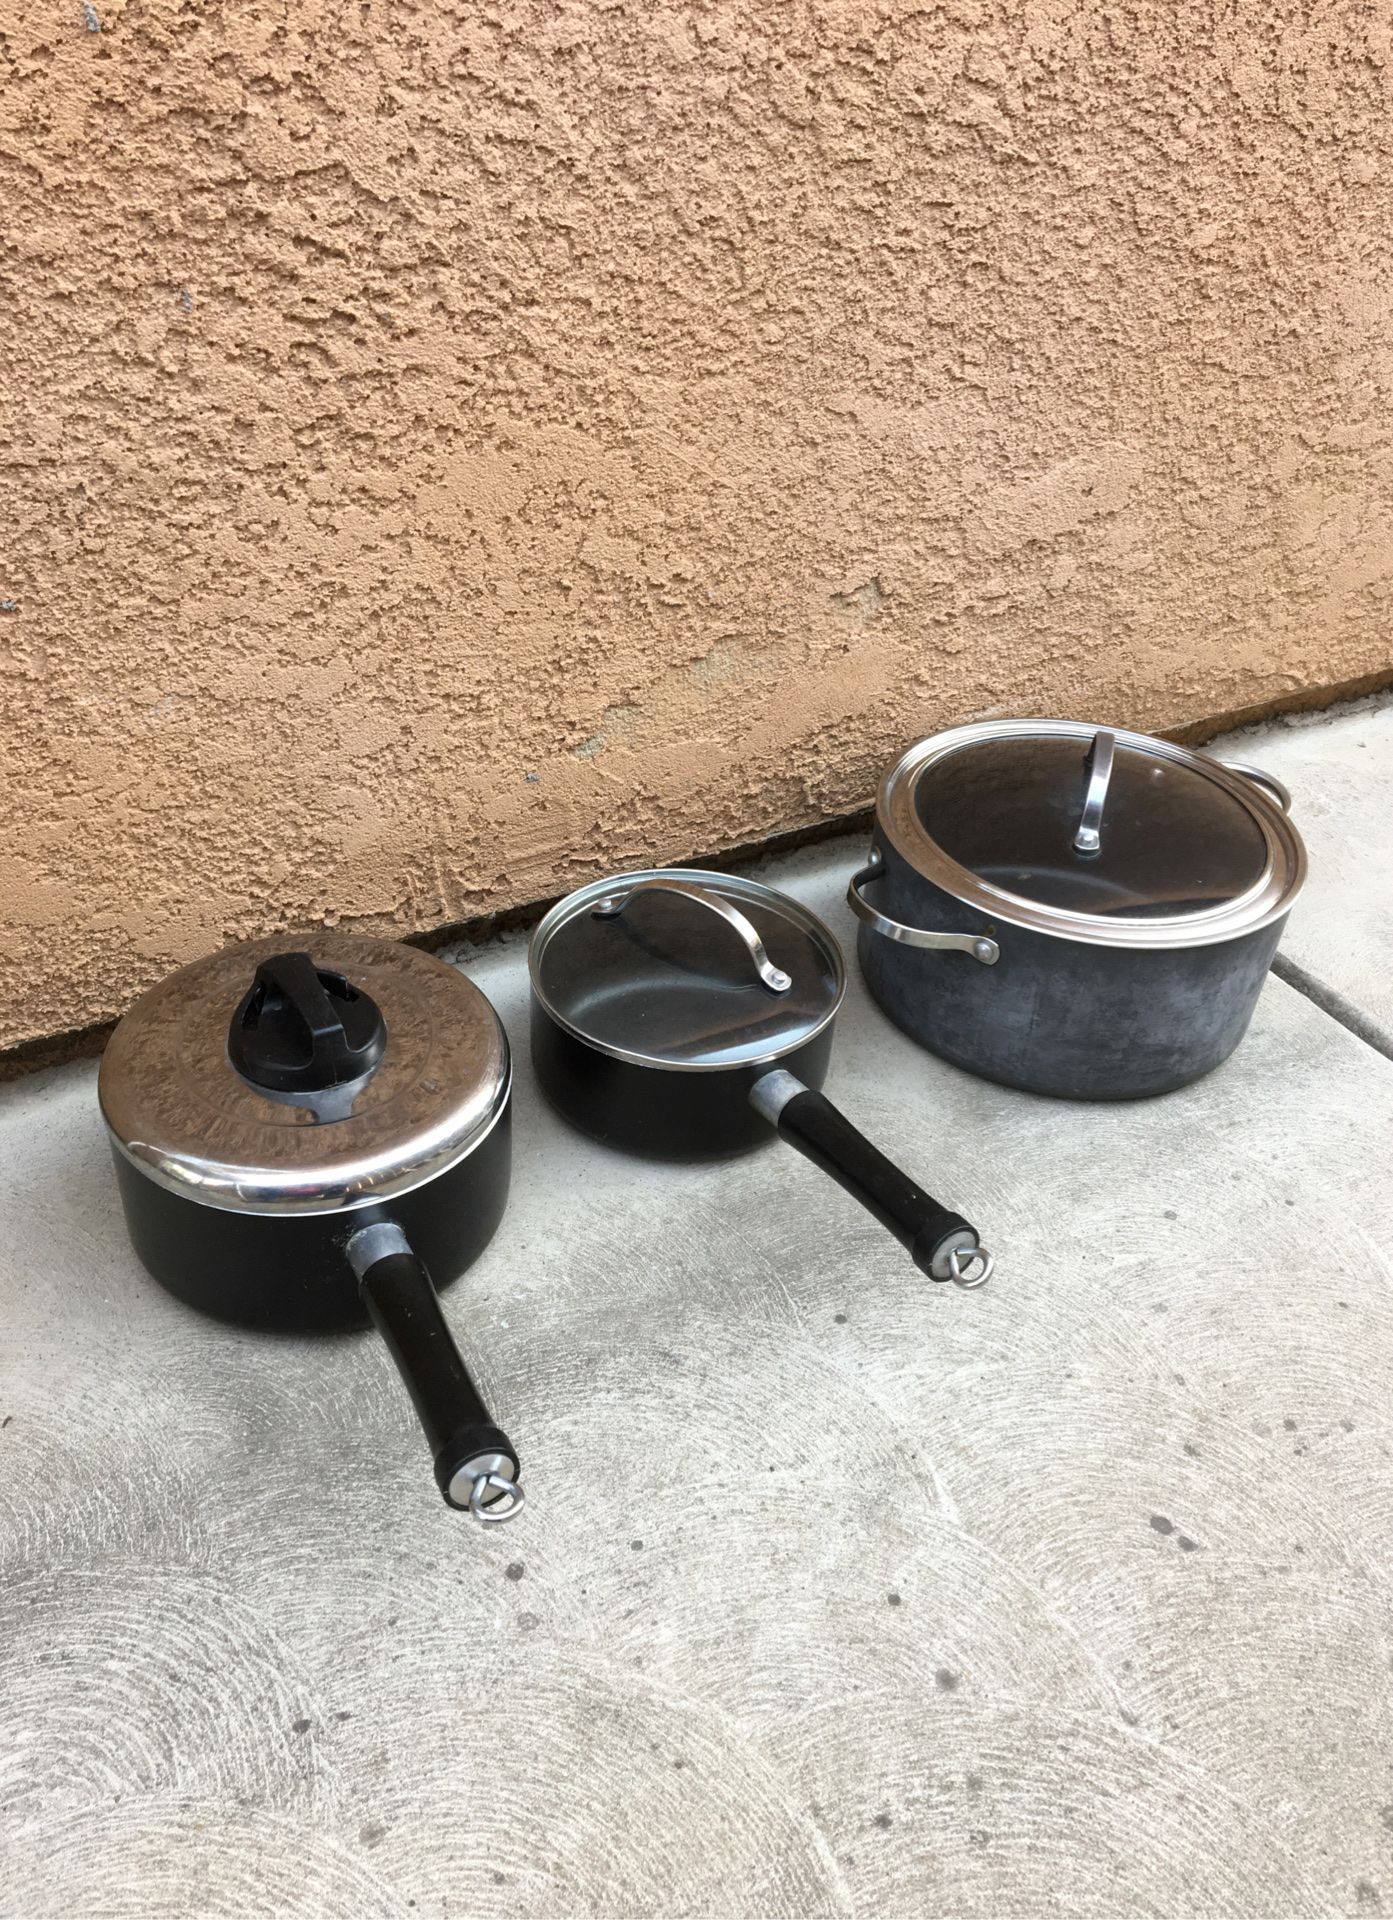 The set of cookware